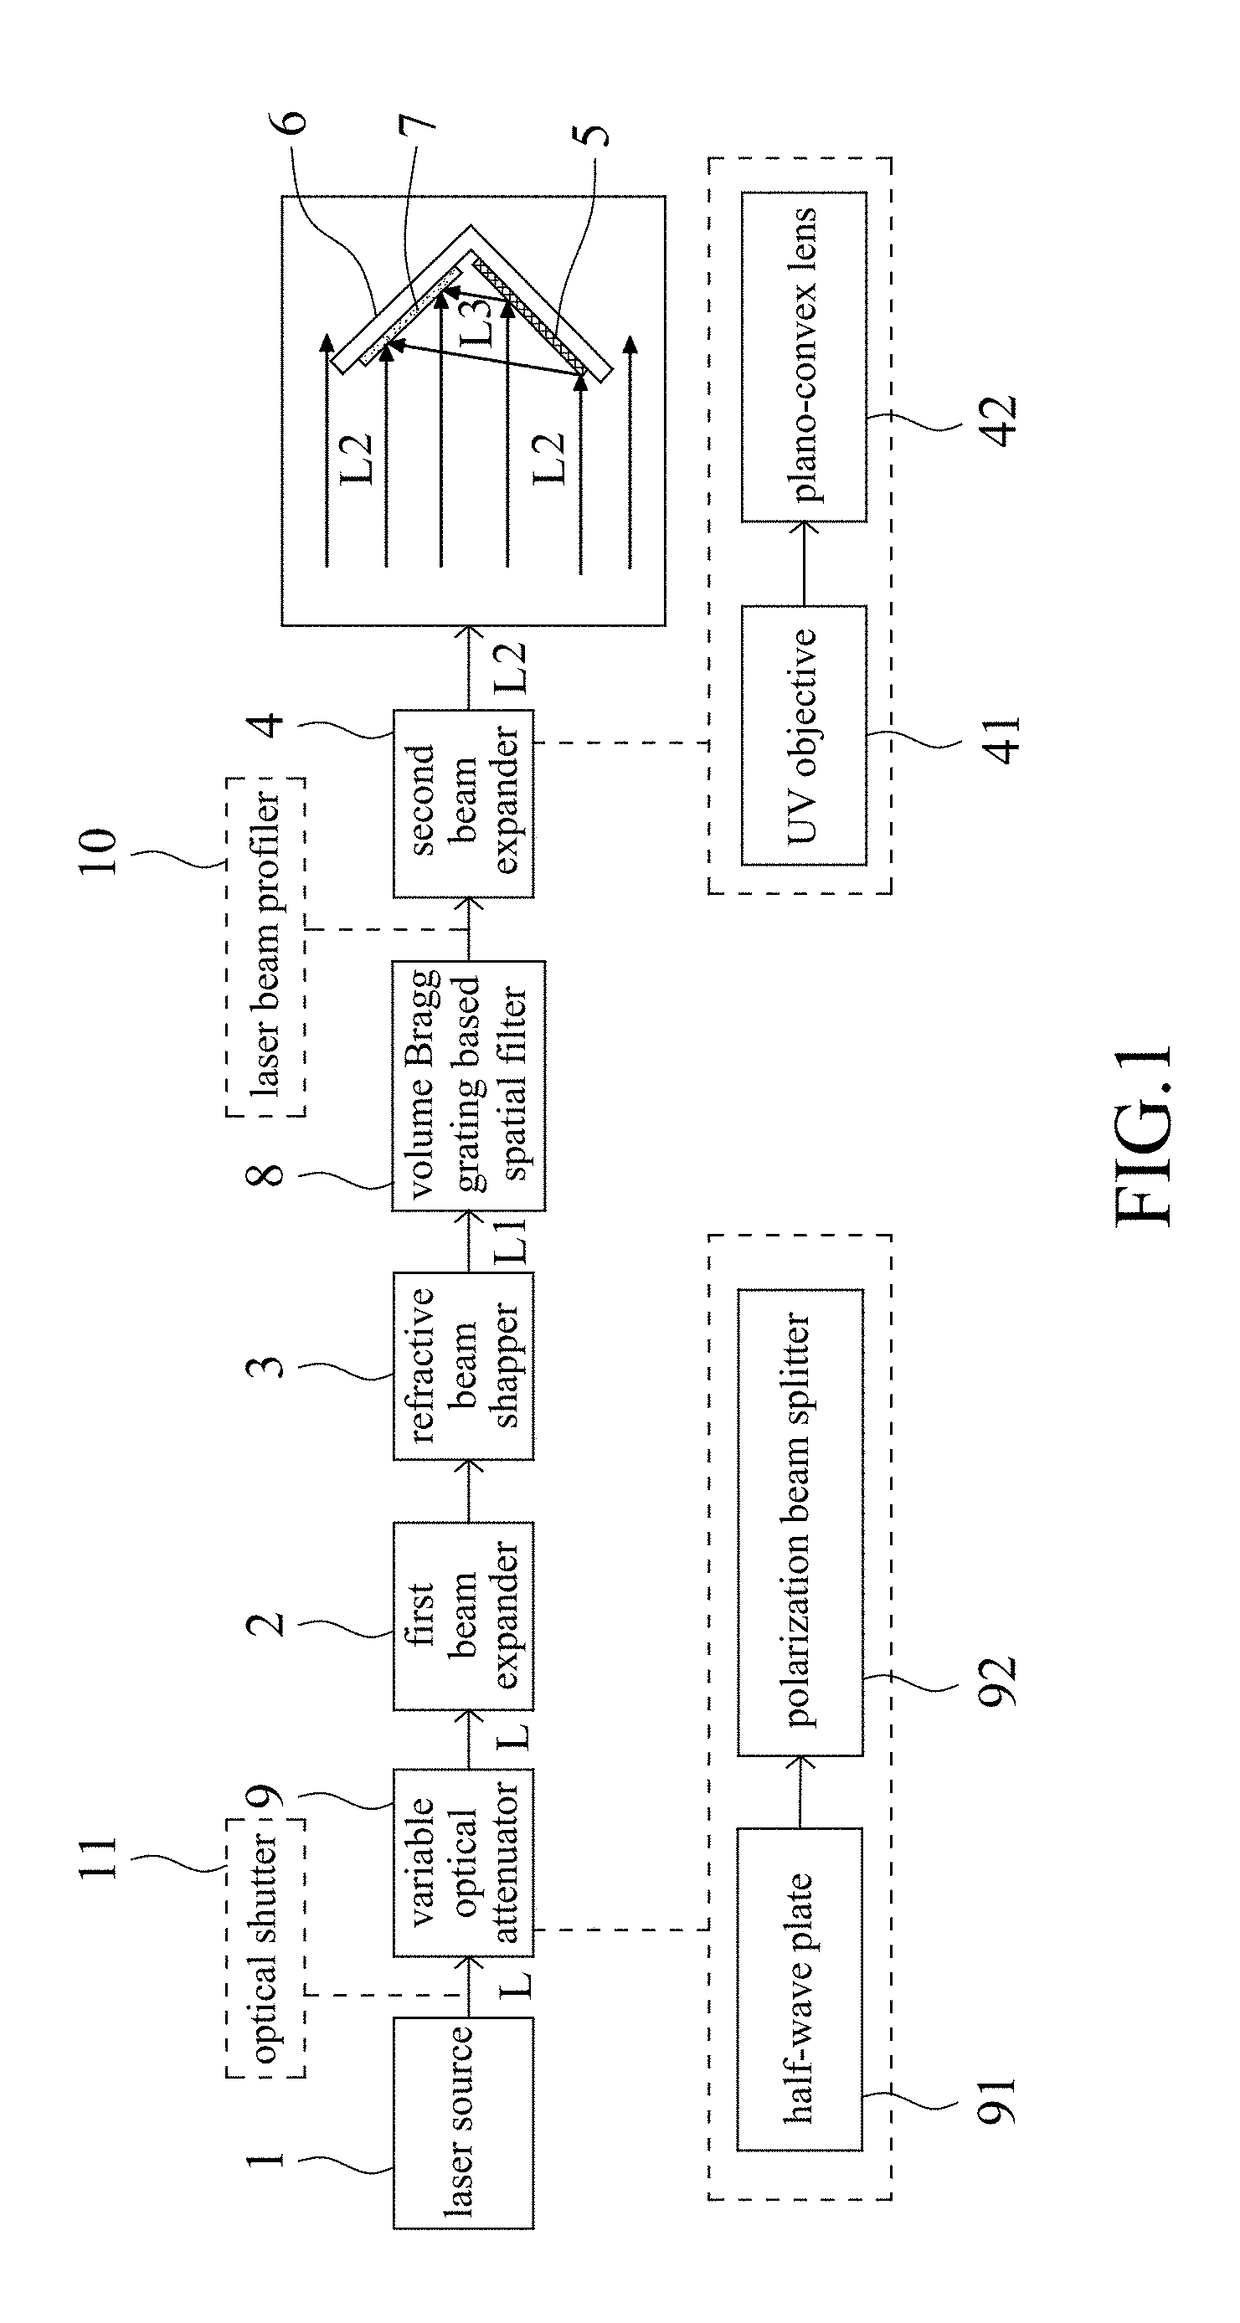 Laser interference lithography system with flat-top intensity profile